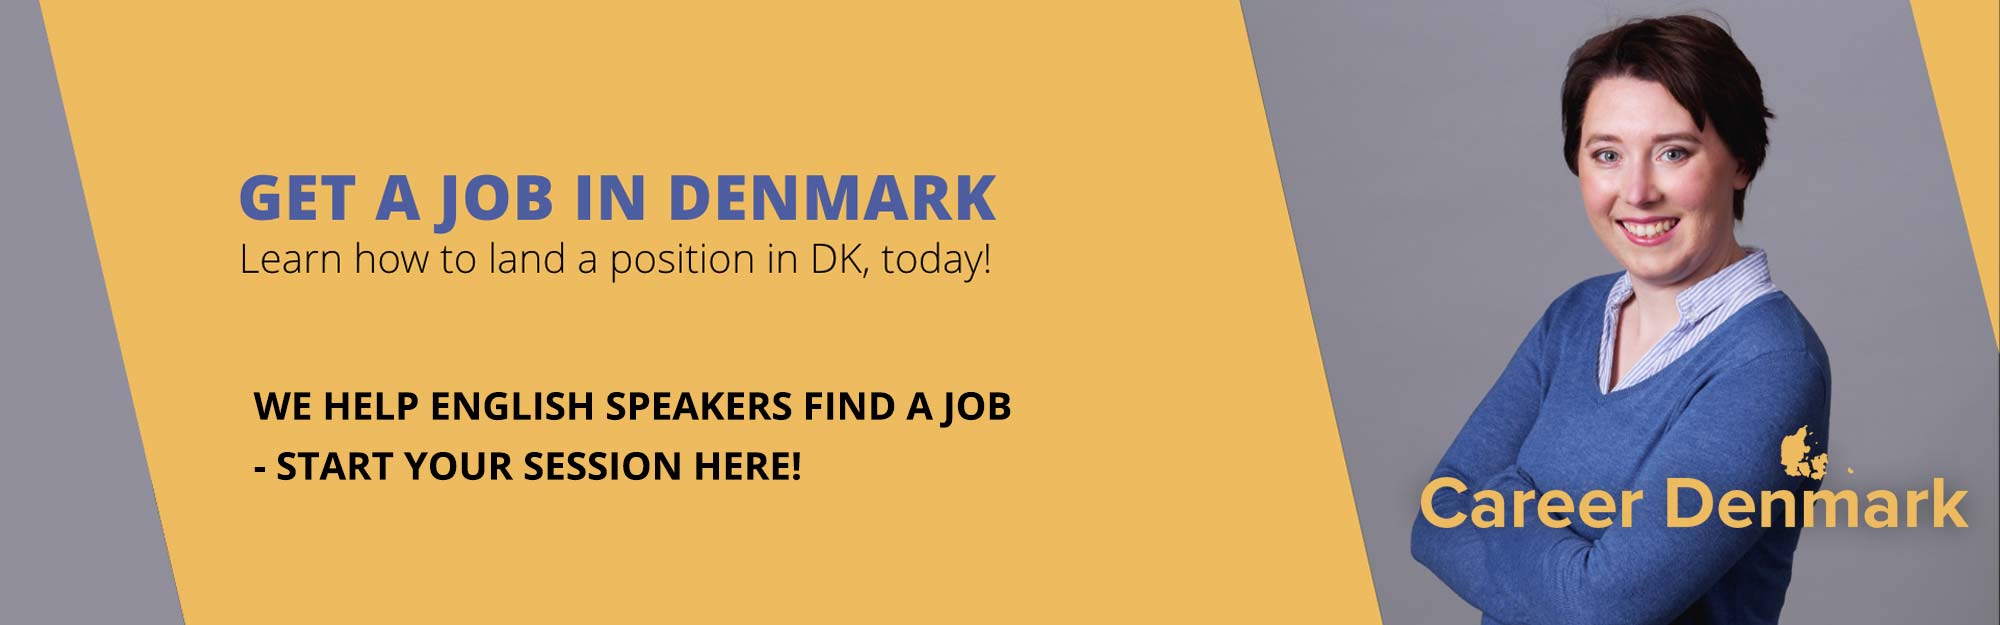 CareerDenmark - learn how to land a job in DK!